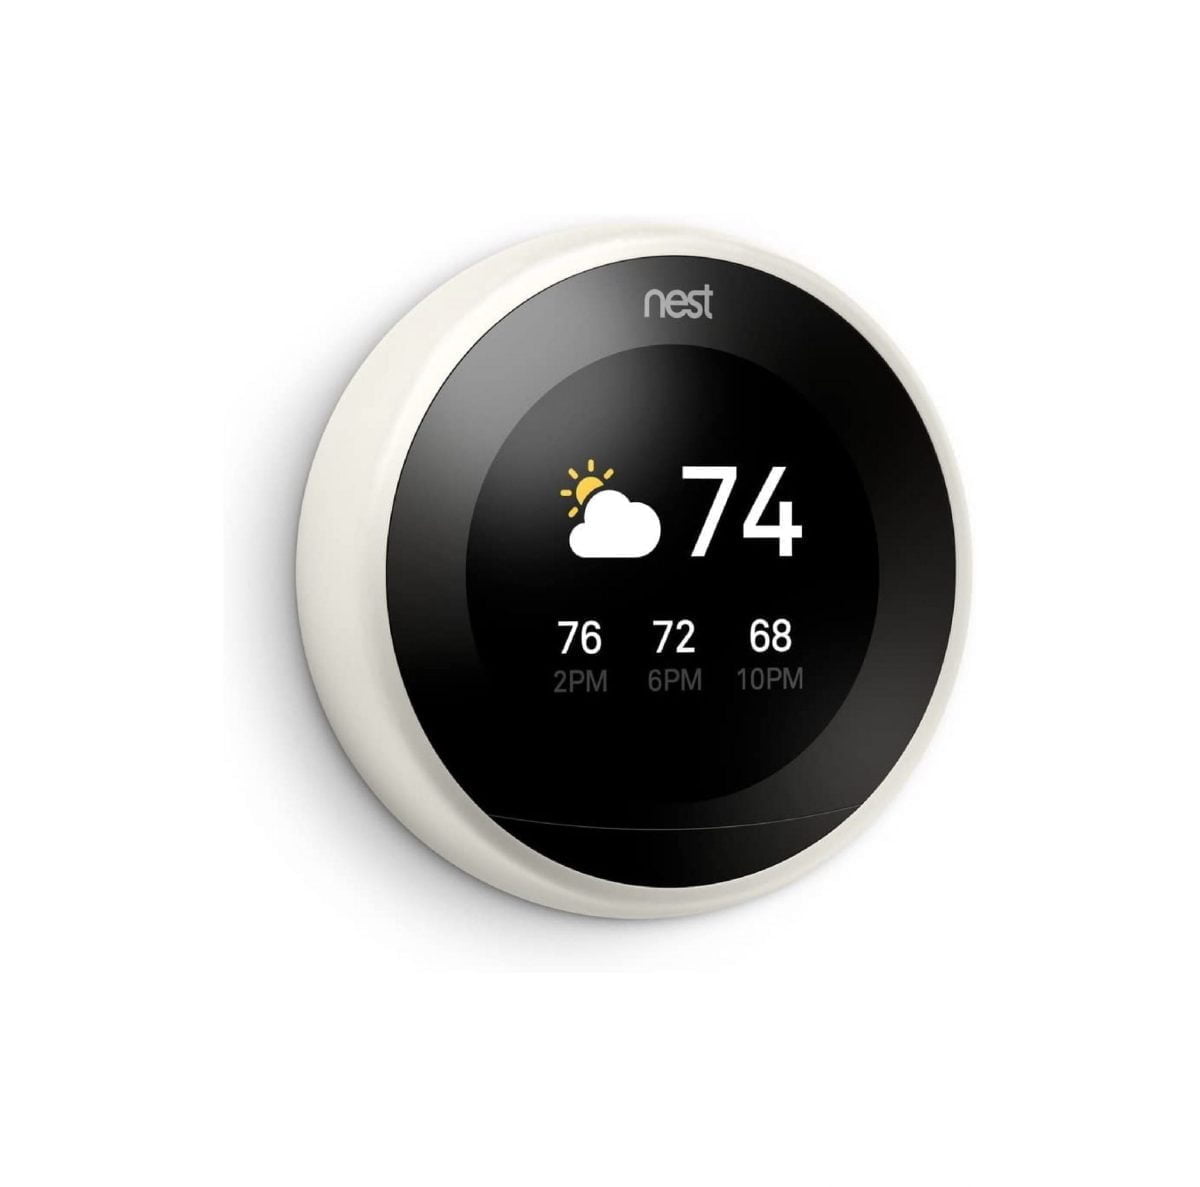 Qwe2 03 Scaled Google &Lt;H1&Gt;Google Nest Learning Smart Wifi Thermostat 3Rd Gen - T3017Us White&Lt;/H1&Gt; &Lt;Ul Class=&Quot;A-Unordered-List A-Vertical A-Spacing-Mini&Quot;&Gt; &Lt;Li&Gt;&Lt;Span Class=&Quot;A-List-Item&Quot;&Gt;Auto-Schedule: No More Confusing Programming. It Learns The Temperatures You Like And Programs Itself.&Lt;/Span&Gt;&Lt;/Li&Gt; &Lt;Li&Gt;&Lt;Span Class=&Quot;A-List-Item&Quot;&Gt;Wi-Fi Thermostat: Connect The Nest Thermostat To Wi-Fi To Change The Temperature From Your Phone, Tablet Or Laptop.&Lt;/Span&Gt;&Lt;/Li&Gt; &Lt;Li&Gt;&Lt;Span Class=&Quot;A-List-Item&Quot;&Gt;Energy Saving: You’ll See The Nest Leaf When You Choose A Temperature That Saves Energy. It Guides You In The Right Direction.&Lt;/Span&Gt;&Lt;/Li&Gt; &Lt;Li&Gt;&Lt;Span Class=&Quot;A-List-Item&Quot;&Gt;Smart Thermostat: Early-On Nest Learns How Your Home Warms Up And Keeps An Eye On The Weather To Get You The Temperature You Want When You Want It.&Lt;/Span&Gt;&Lt;/Li&Gt; &Lt;Li&Gt;&Lt;Span Class=&Quot;A-List-Item&Quot;&Gt;Home/Away Assist: The Nest Thermostat Automatically Turns Itself Down When You’re Away To Avoid Heating Or Cooling An Empty Home.&Lt;/Span&Gt;&Lt;/Li&Gt; &Lt;Li&Gt;&Lt;Span Class=&Quot;A-List-Item&Quot;&Gt;Works With Amazon Alexa For Voice Control (Alexa Device Sold Separately)&Lt;/Span&Gt;&Lt;/Li&Gt; &Lt;Li&Gt;&Lt;Span Class=&Quot;A-List-Item&Quot;&Gt;Auto-Schedule: Nest Learns The Temperatures You Like And Programs Itself In About A Week.&Lt;/Span&Gt;&Lt;/Li&Gt; &Lt;/Ul&Gt; &Lt;H5&Gt;Note : Direct Replacement Warranty One Year&Lt;/H5&Gt; &Lt;Div Class=&Quot;Html-Fragment&Quot;&Gt; &Lt;Div&Gt; &Lt;B&Gt;We Also Provide International Wholesale And Retail Shipping To All Gcc Countries: Saudi Arabia, Qatar, Oman, Kuwait, Bahrain.&Lt;/B&Gt; &Lt;/Div&Gt; &Lt;/Div&Gt; &Lt;Div Class=&Quot;A-Row A-Expander-Container A-Expander-Inline-Container&Quot; Aria-Live=&Quot;Polite&Quot;&Gt; &Lt;Div Class=&Quot;A-Expander-Content A-Expander-Extend-Content A-Expander-Content-Expanded&Quot; Aria-Expanded=&Quot;True&Quot;&Gt;&Lt;/Div&Gt; &Lt;/Div&Gt; Thermostat Google Nest Learning Smart Wifi Thermostat 3Rd Gen - T3017Us White